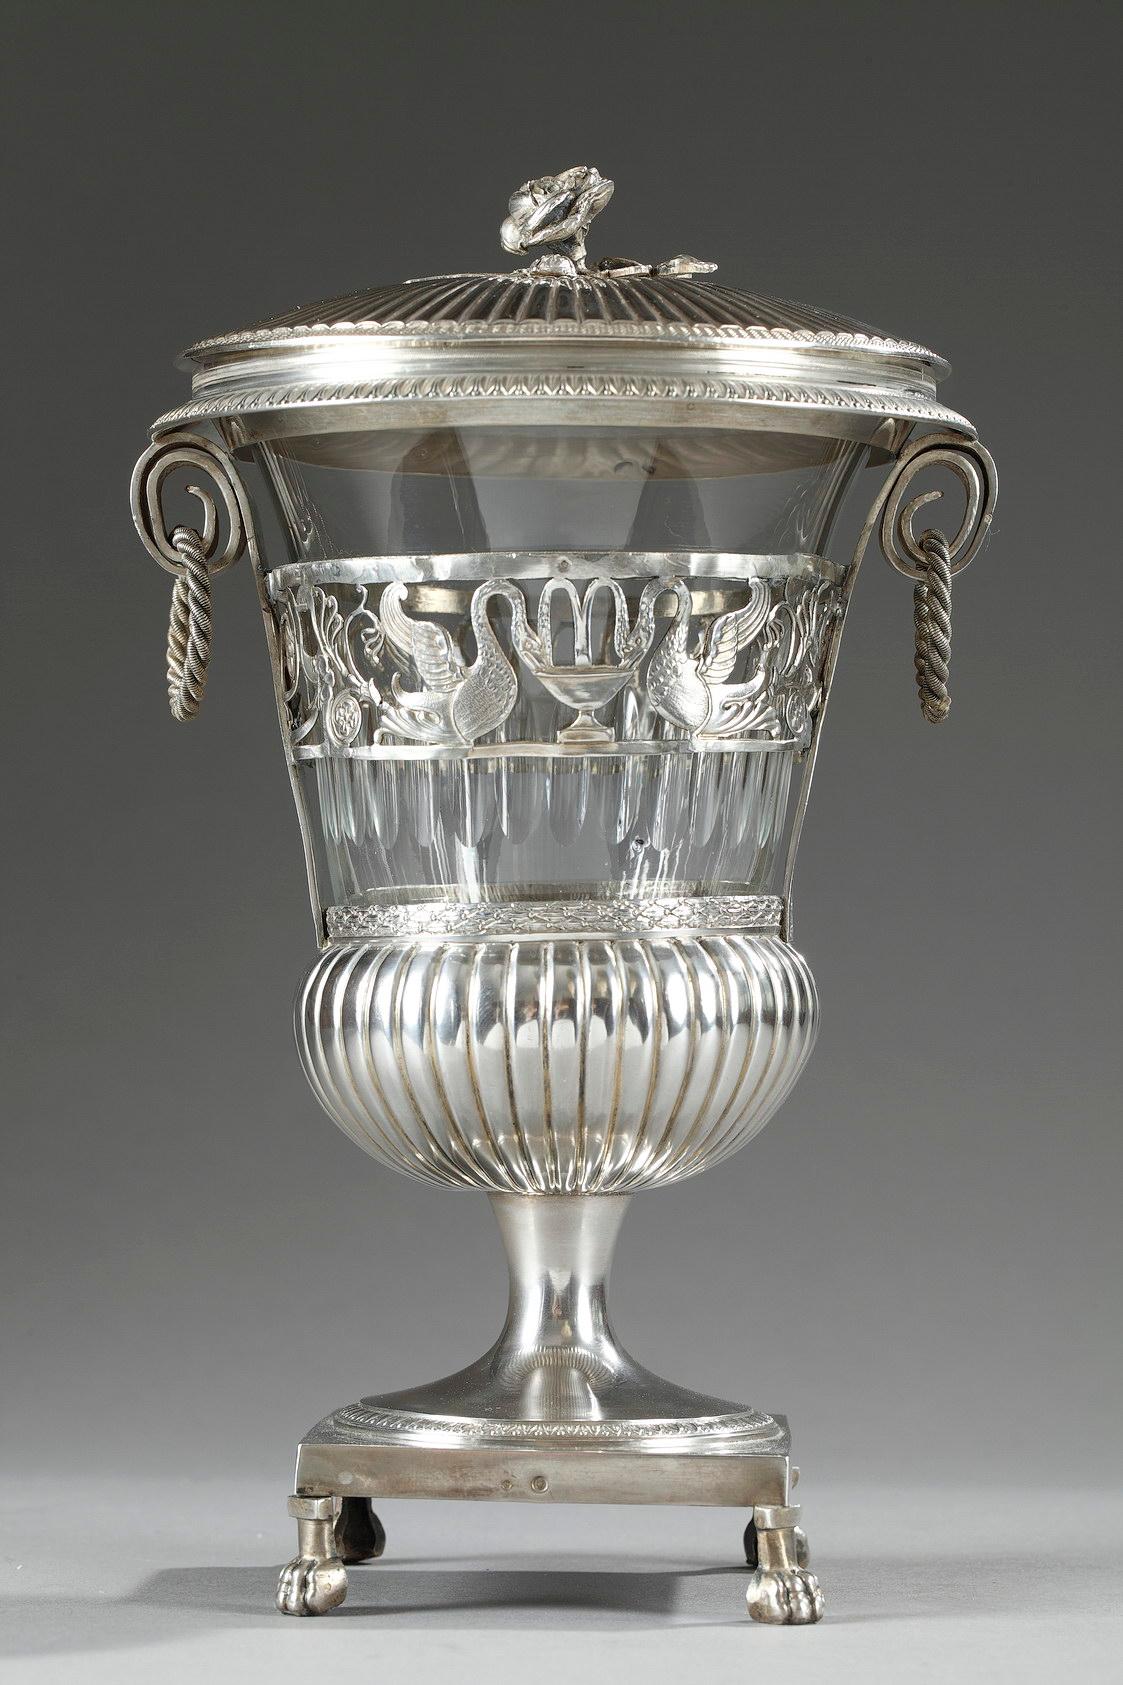 An early 19th century silver and crystal sweetmeat basket decorated with an openwork frieze depicting swans drinking from a fountain, rinceau and small flowers. Two rolled up stripes finely chiseled with branches form the handles, of which are